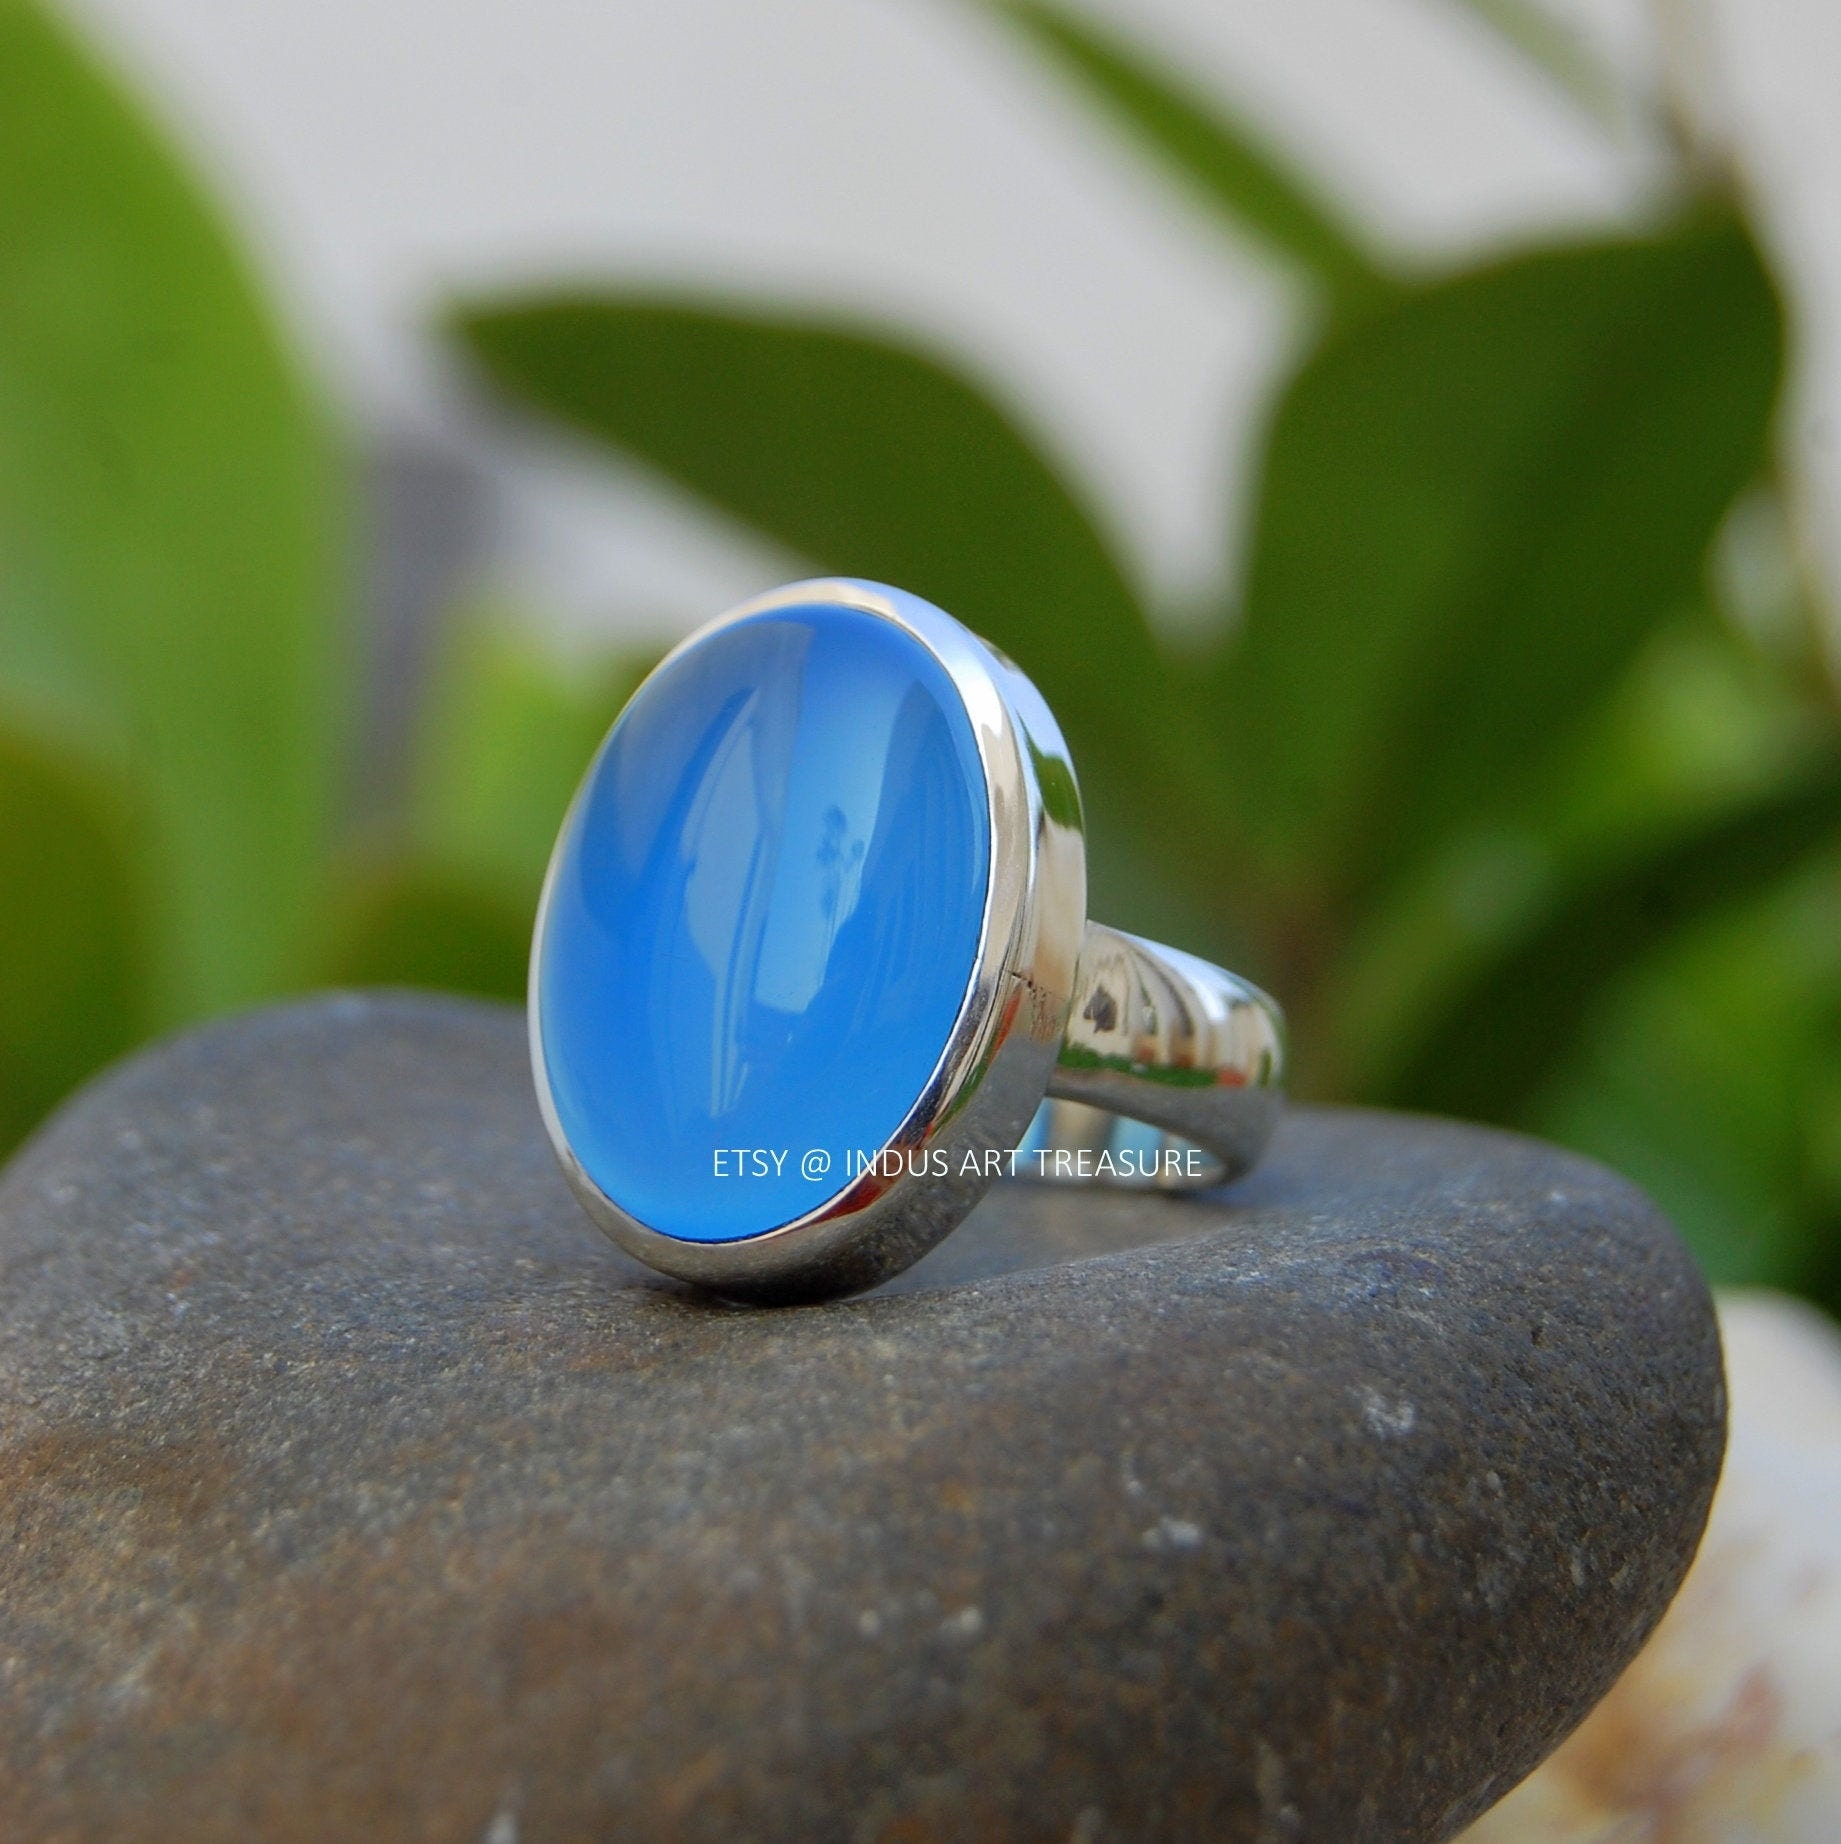 Aqua Chalcedony Ring Natural Ring Gemstone Ring Gift For Women 925 Sterling Silver Ring Statement Ring Aqua Stone Ring Etsy Ring